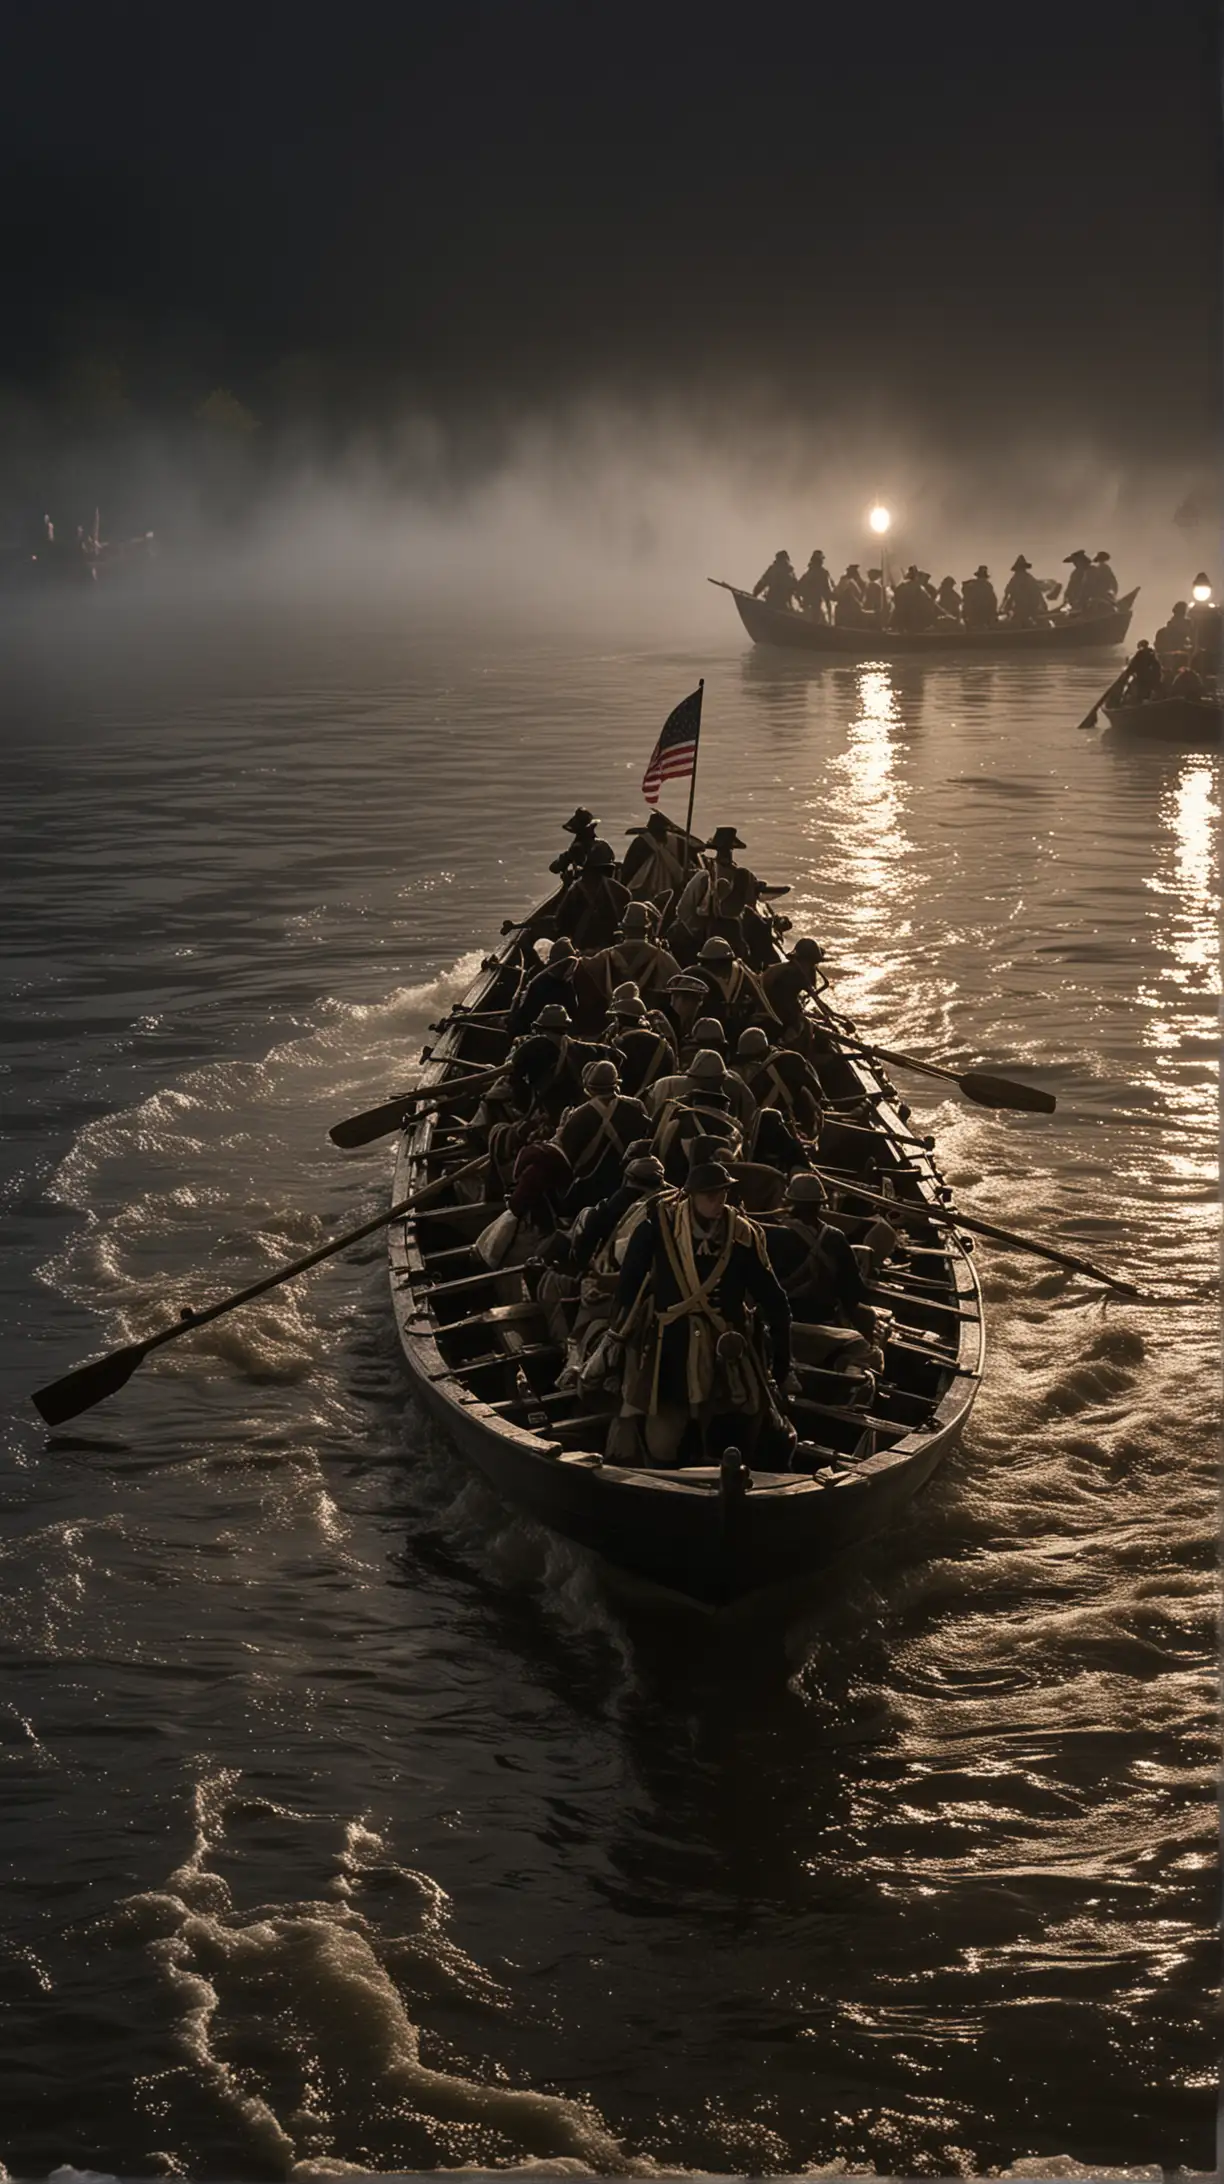  A dramatic reenactment of Washington crossing the Delaware River. Soldiers in colonial garb row a boat through choppy water, illuminated by the faint glow of dawn.
